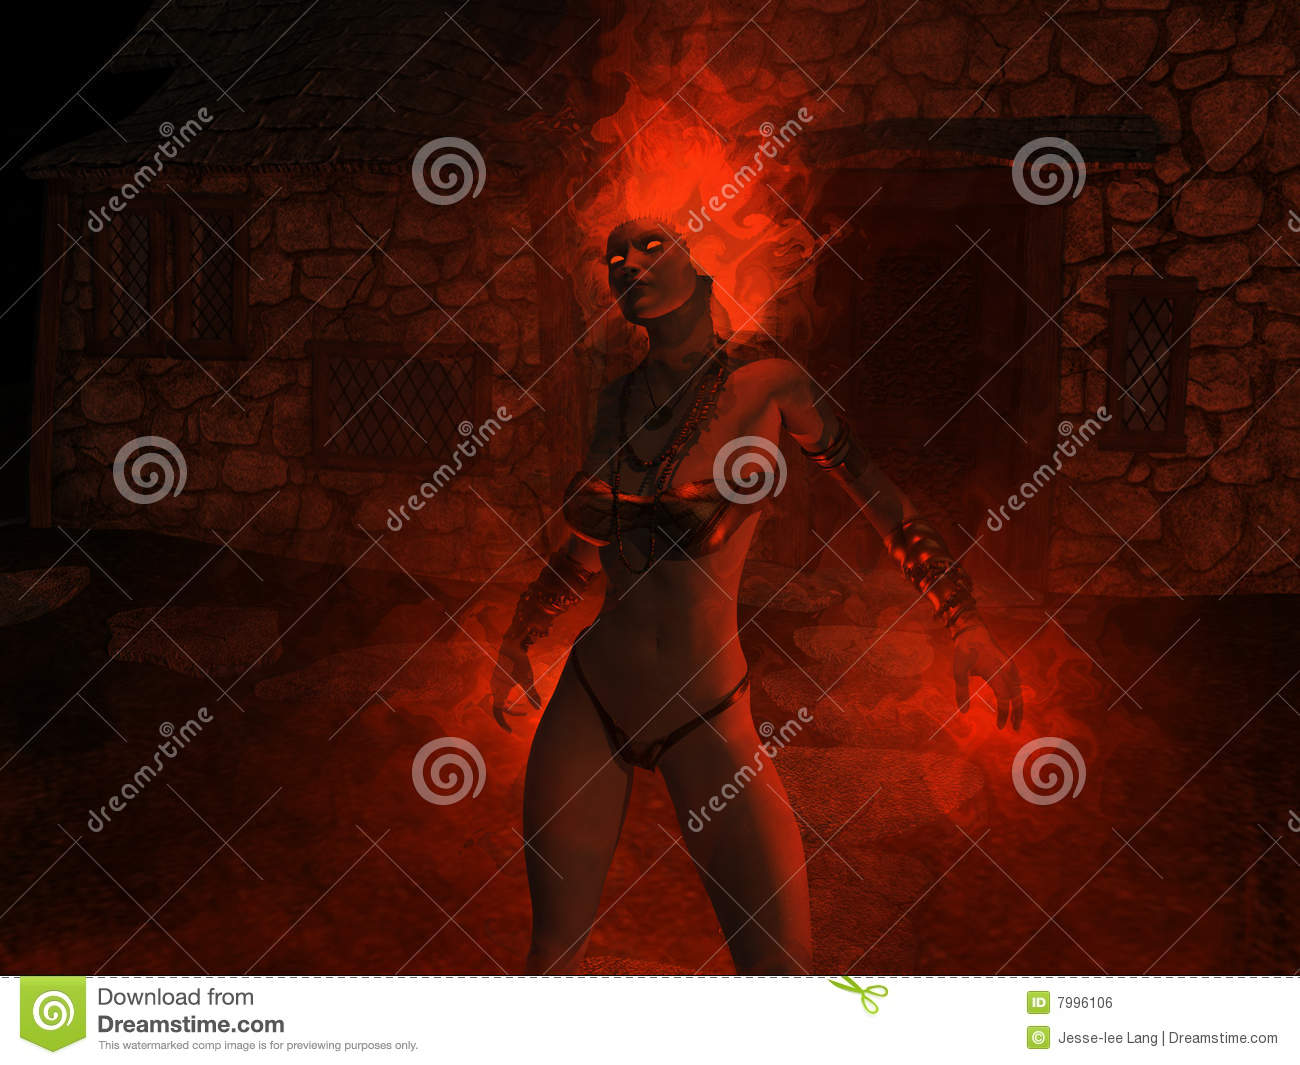 Wizard Woman Castin Fire Spells Royalty Free Stock Image   Image